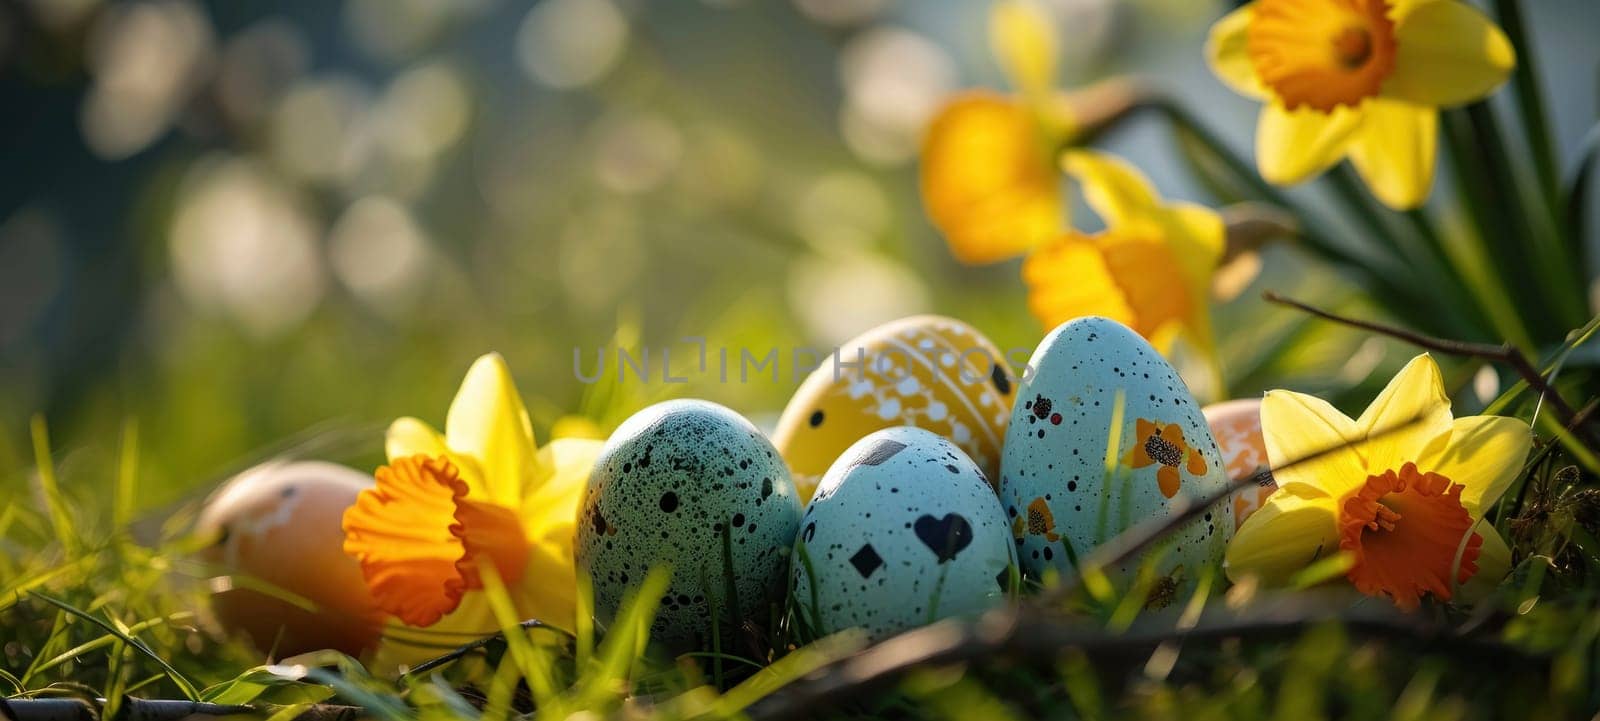 Colorful Easter eggs hidden in fresh, blooming daffodils signify the joy of springtime festivities.